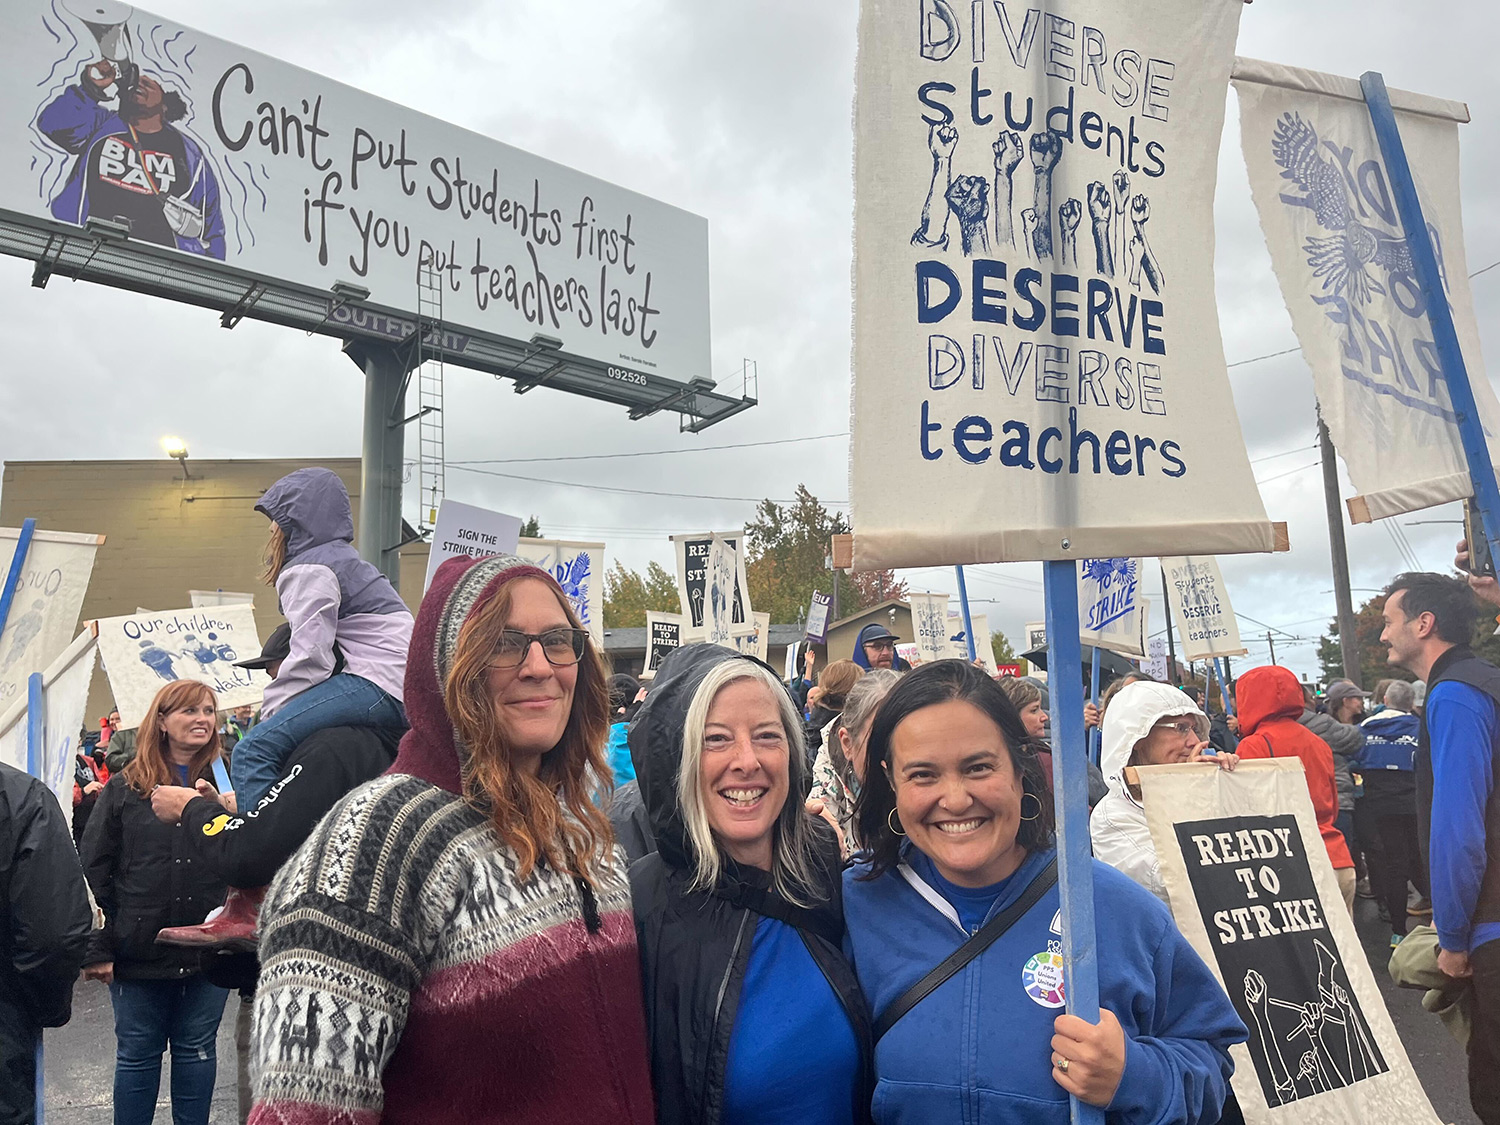 Three teachers standing in a a group of teachers in front of a sign that reads "Diverse Students deserve diverse teachers"